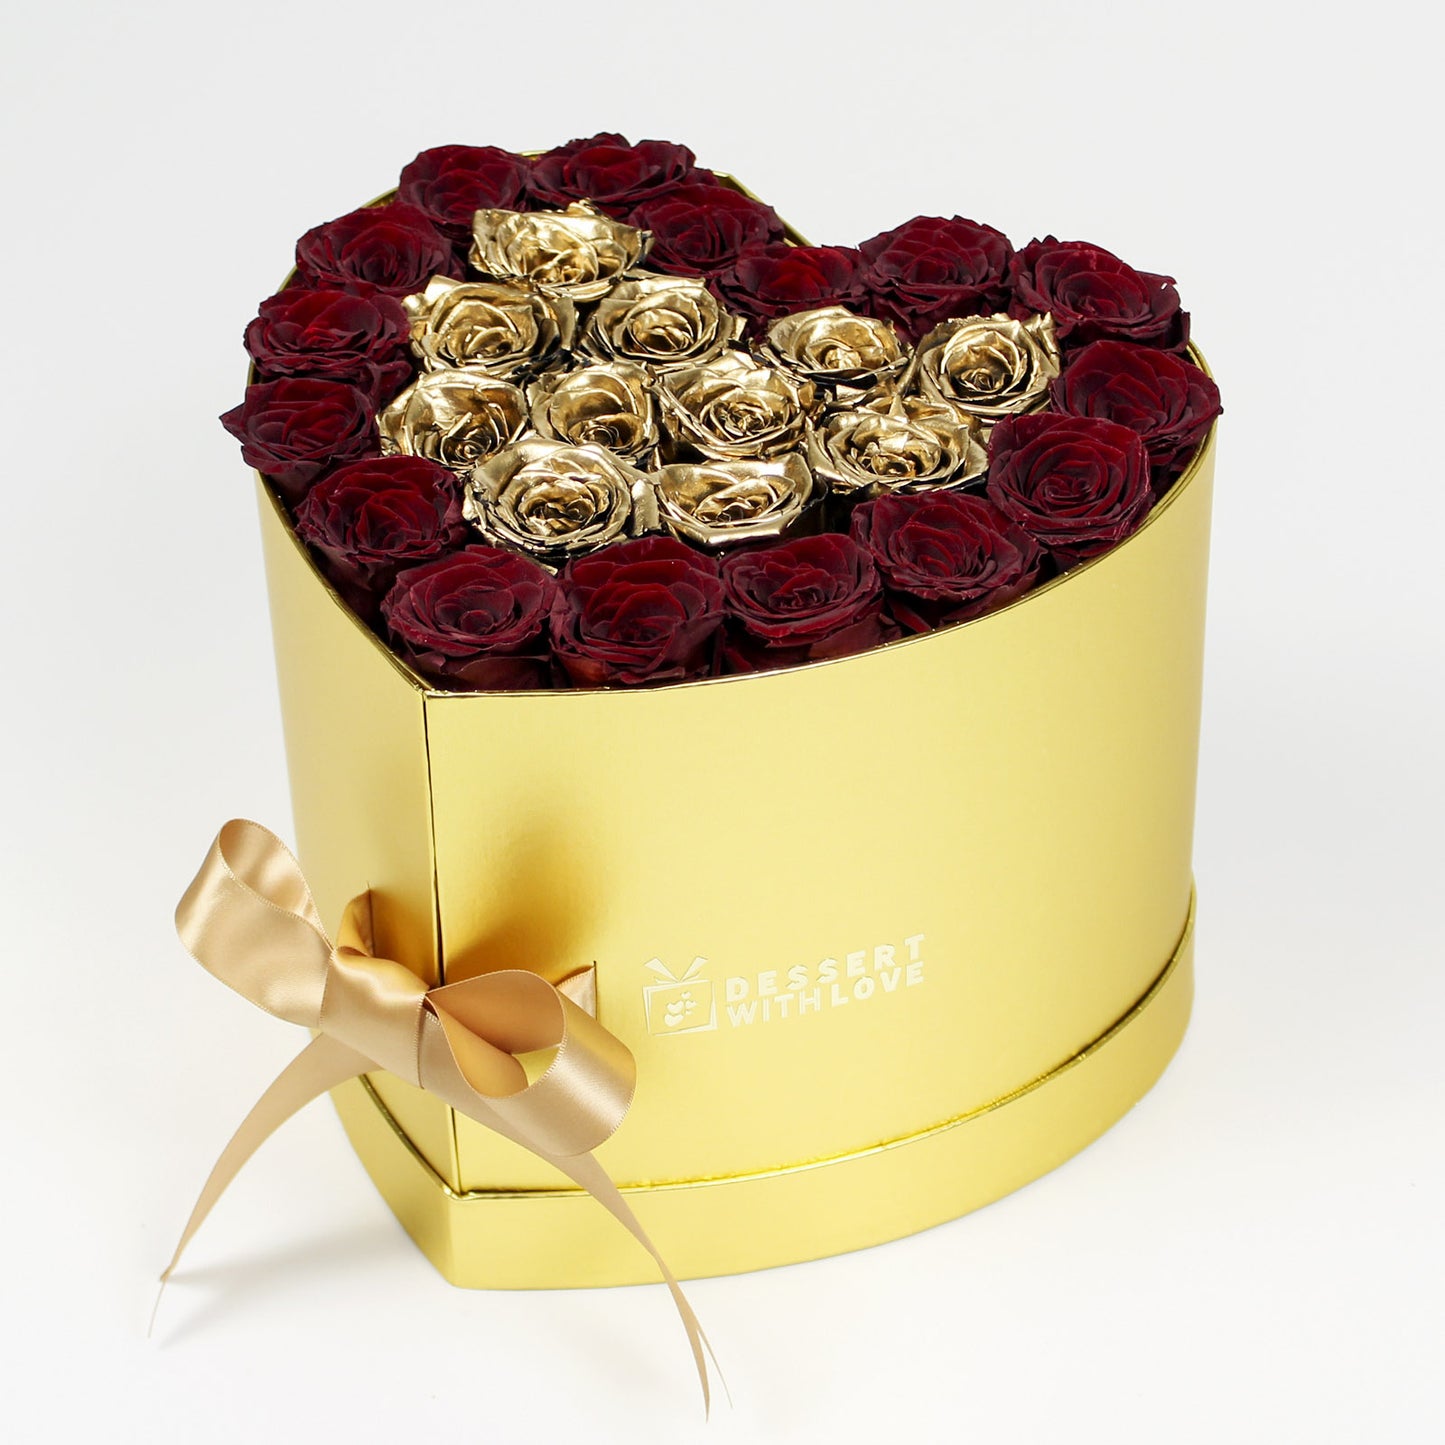 DUAL LAYER GOLD HEART BOX | DARK RED & GOLD ROSES